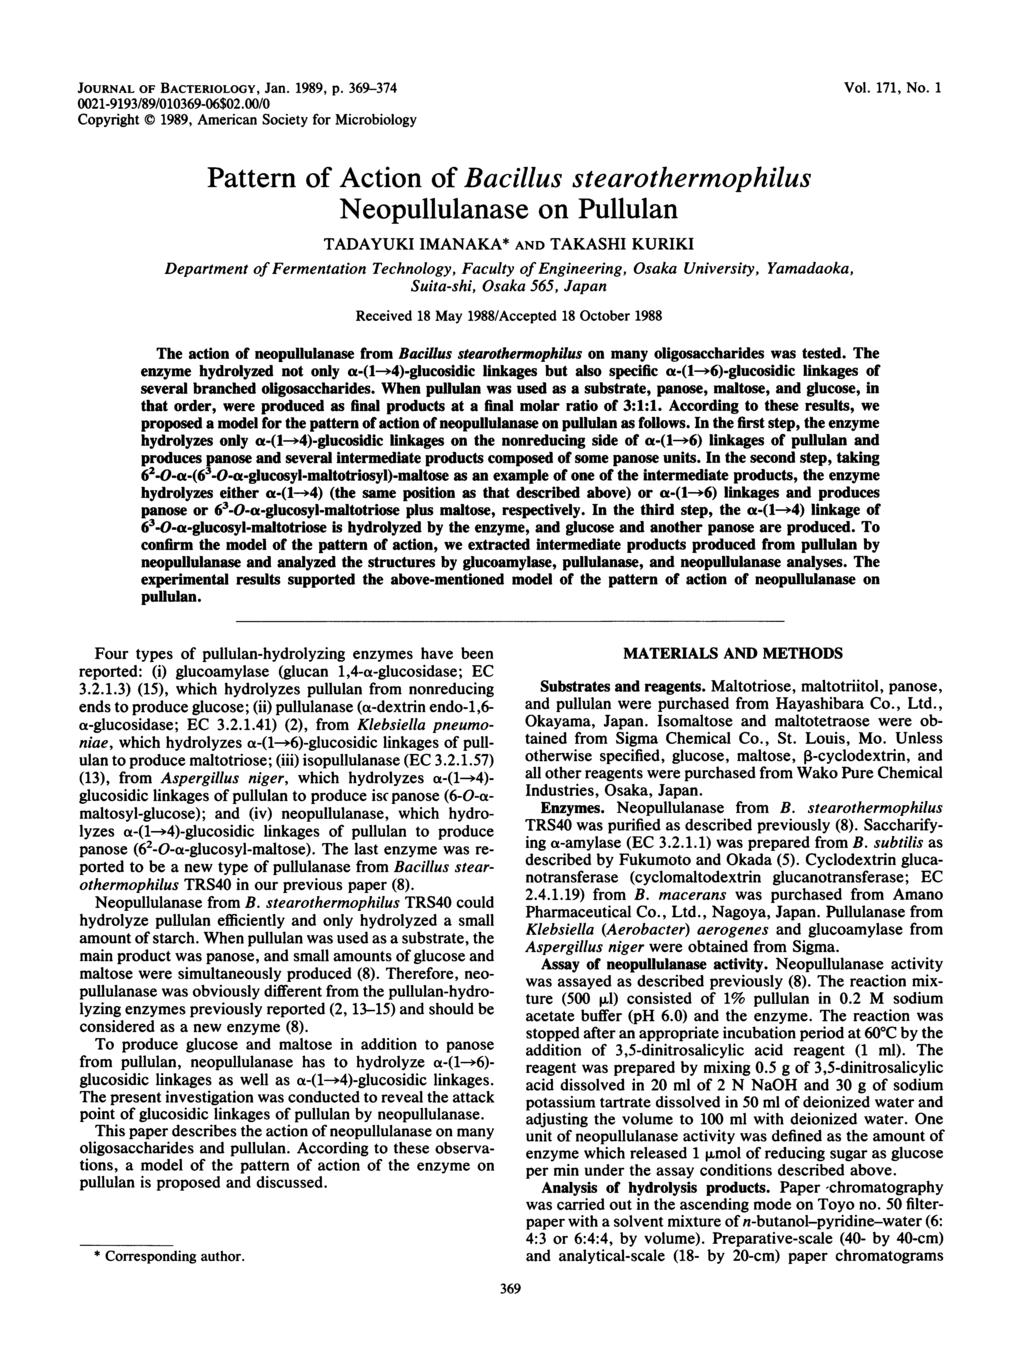 JOURNAL OF BACTERIOLOGY, Jan. 1989, p. 369-374 21-9193/89/1369-6$2./ Copyright 1989, American Society for Microbiology Vol. 171, No.